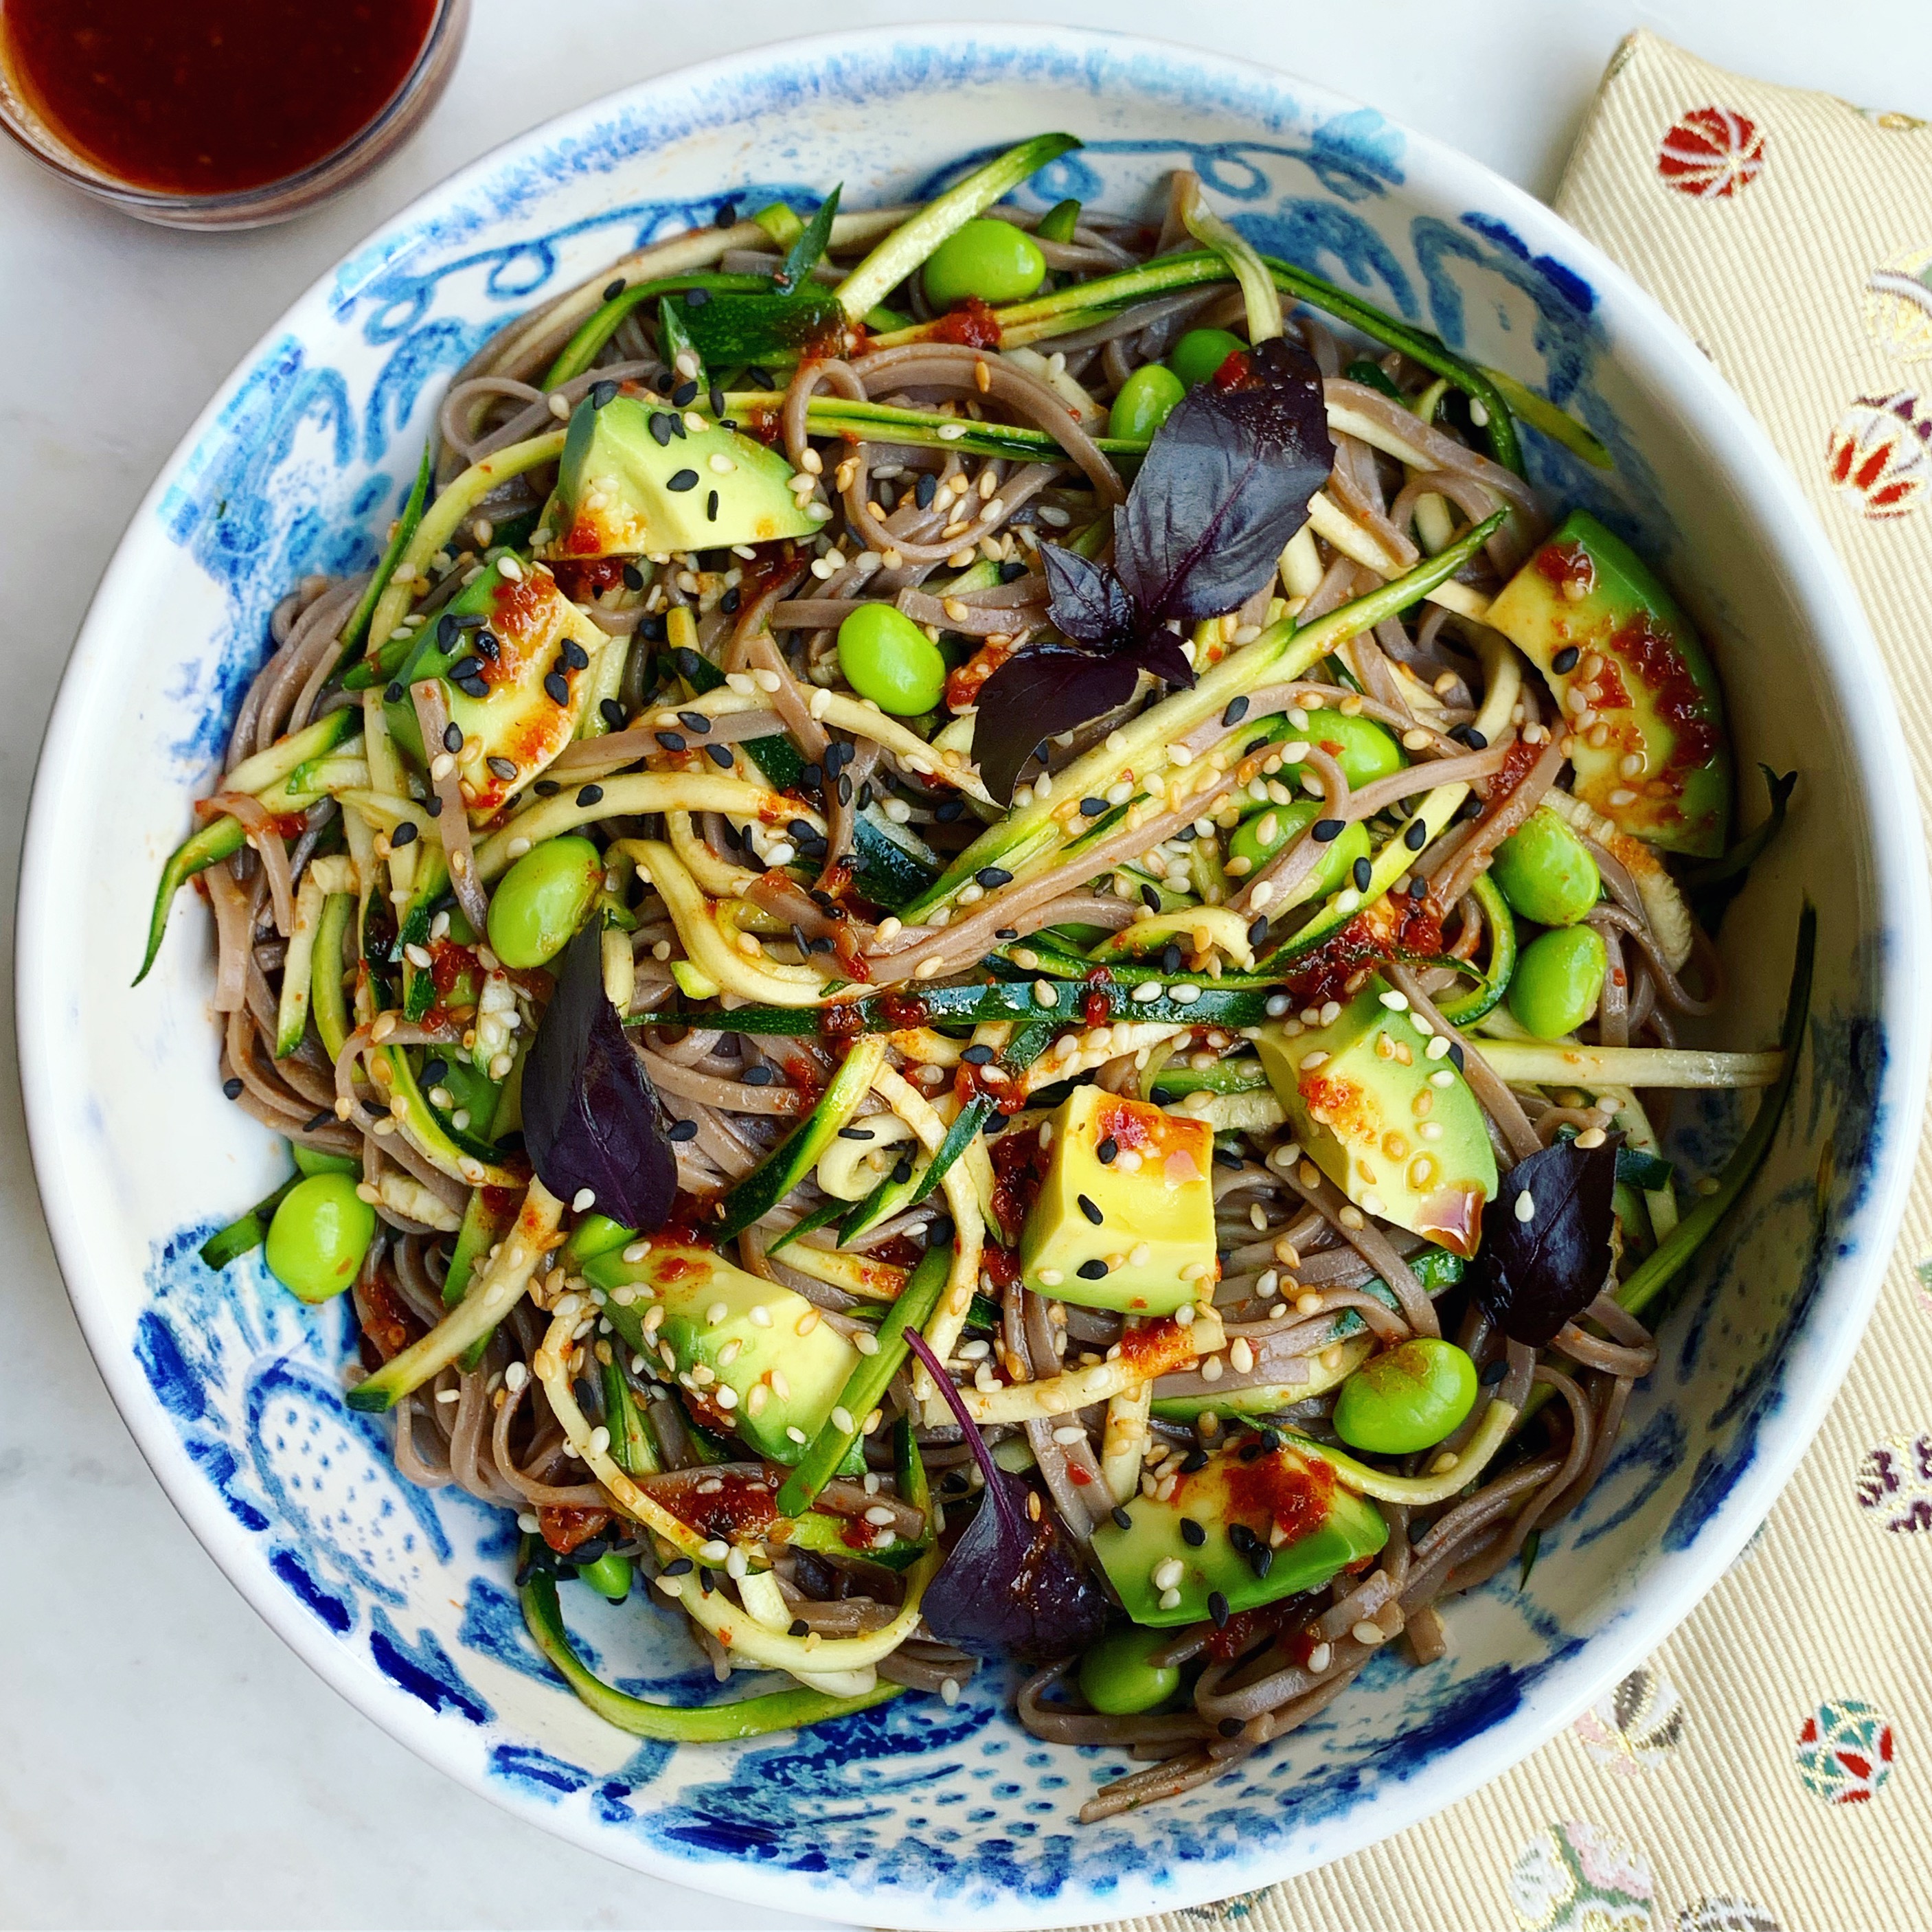 Chilled Soba Noodles with Avocado & Chili Garlic Sauce